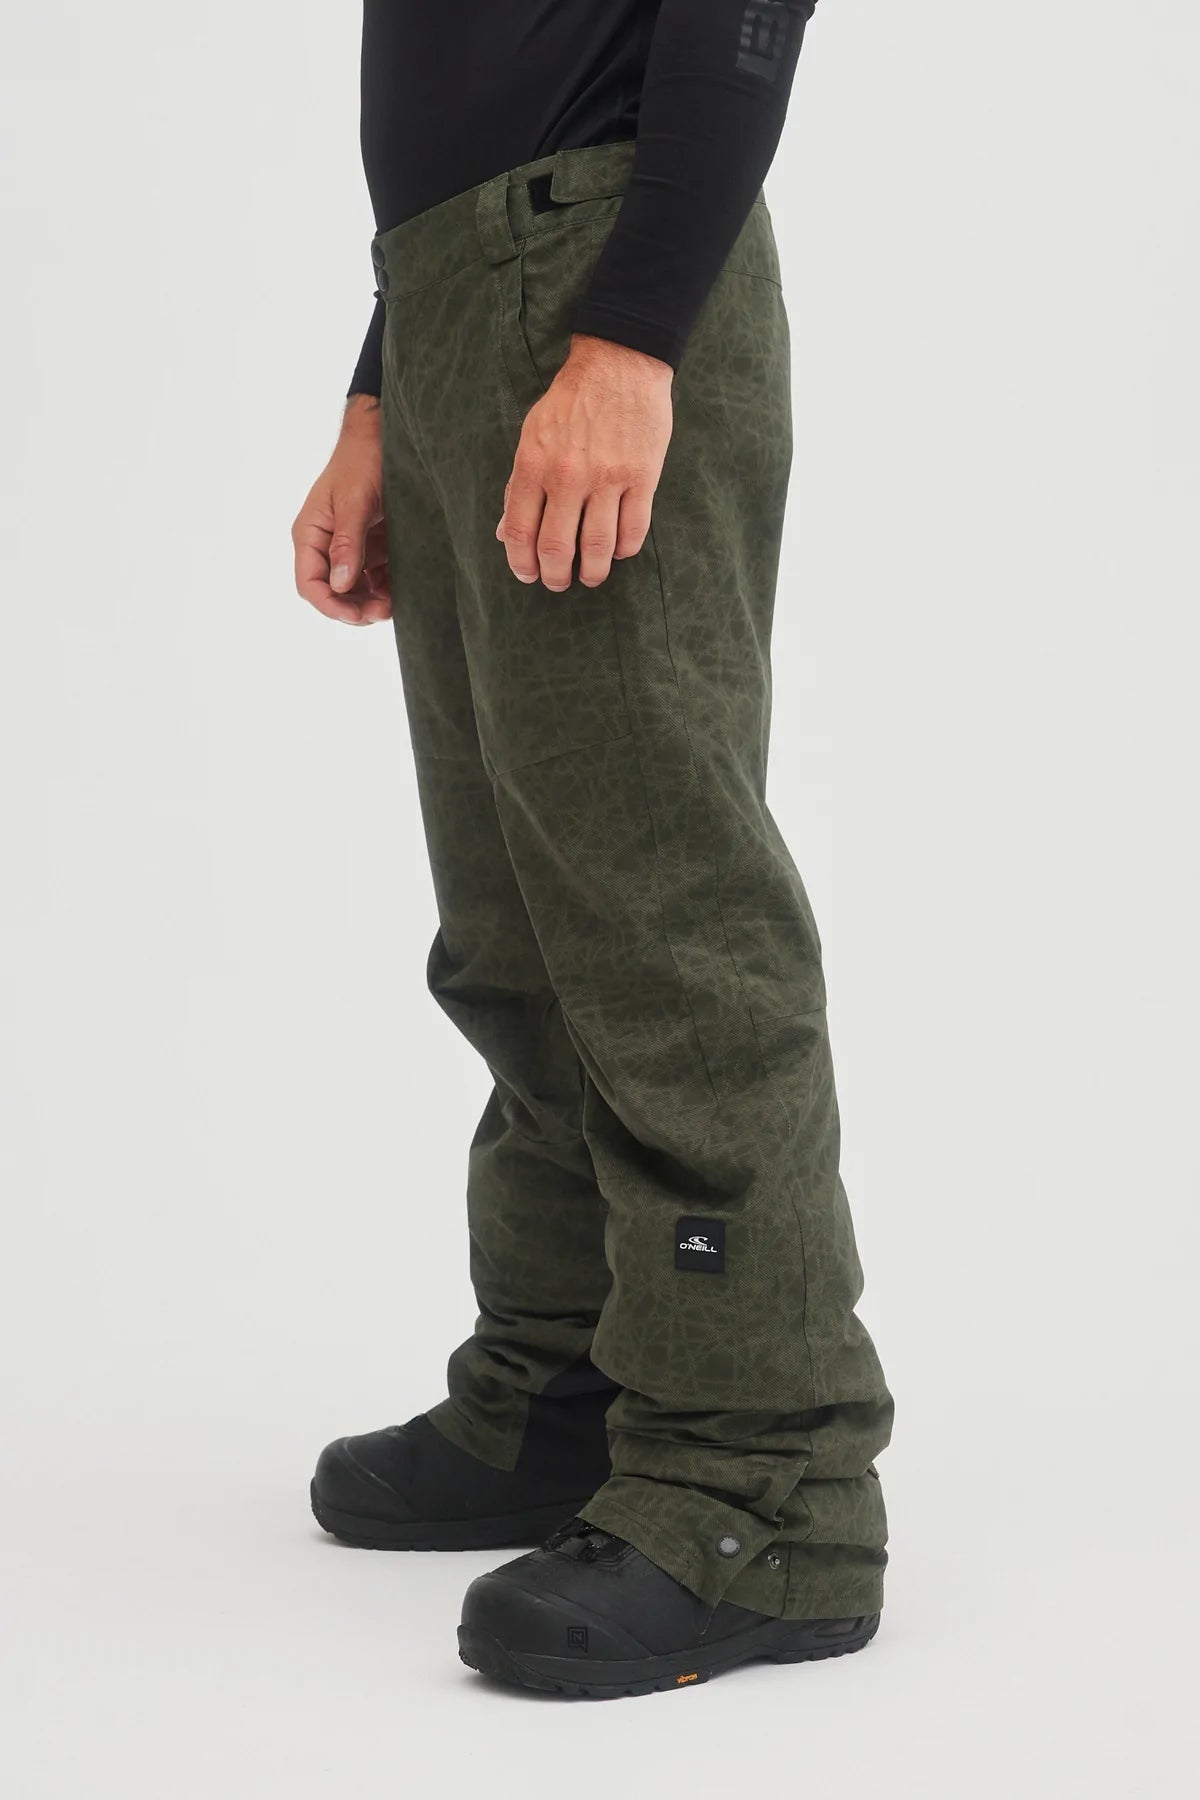 O'Neill Hammered Print Men's Ski / Snowboard Pants-Sports Replay - Sports Excellence-Sports Replay - Sports Excellence